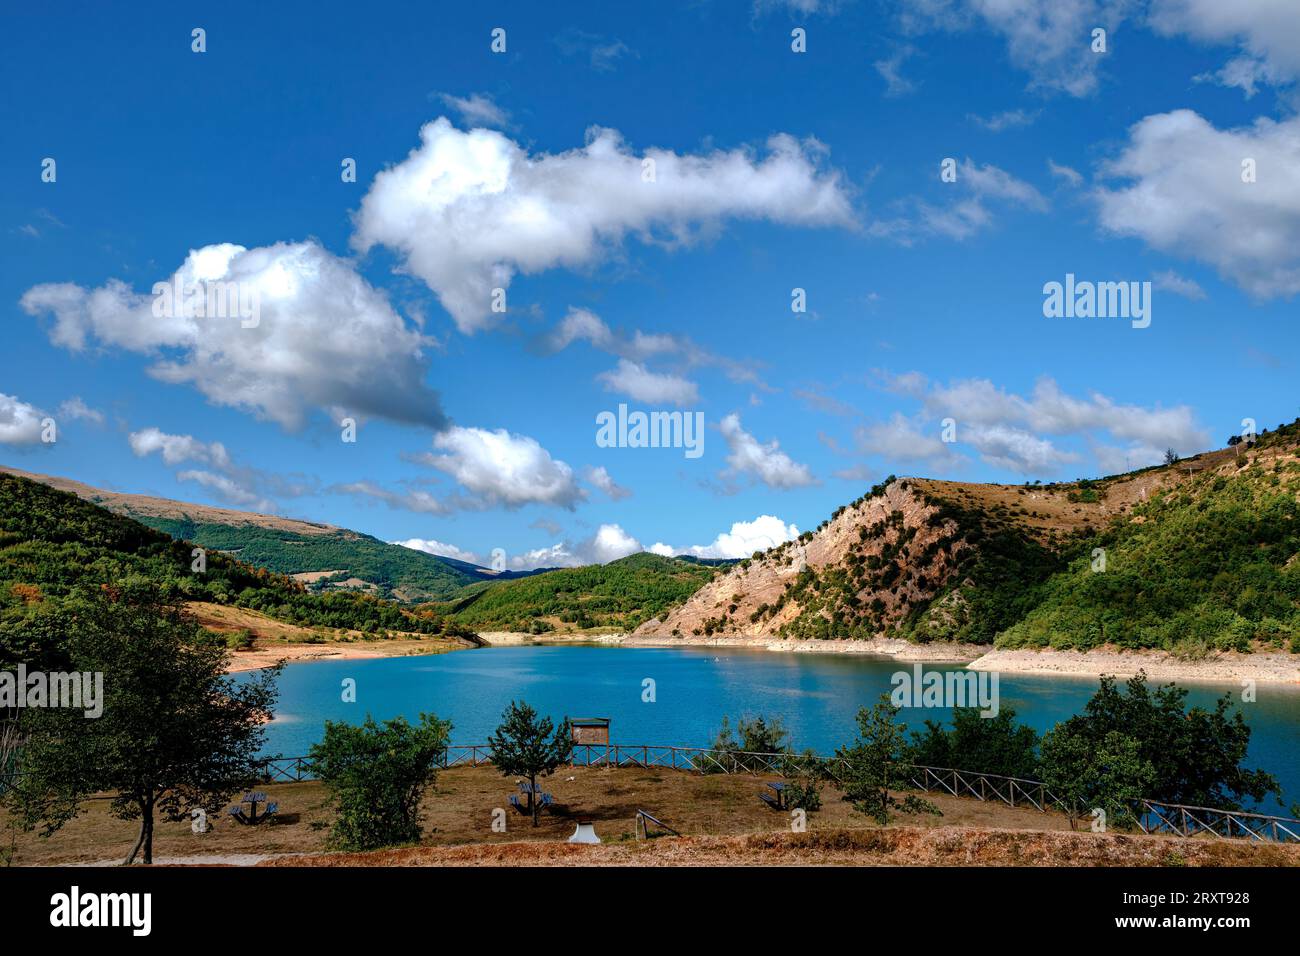 View of Fiastra lake in the Marche region, Italy Stock Photo